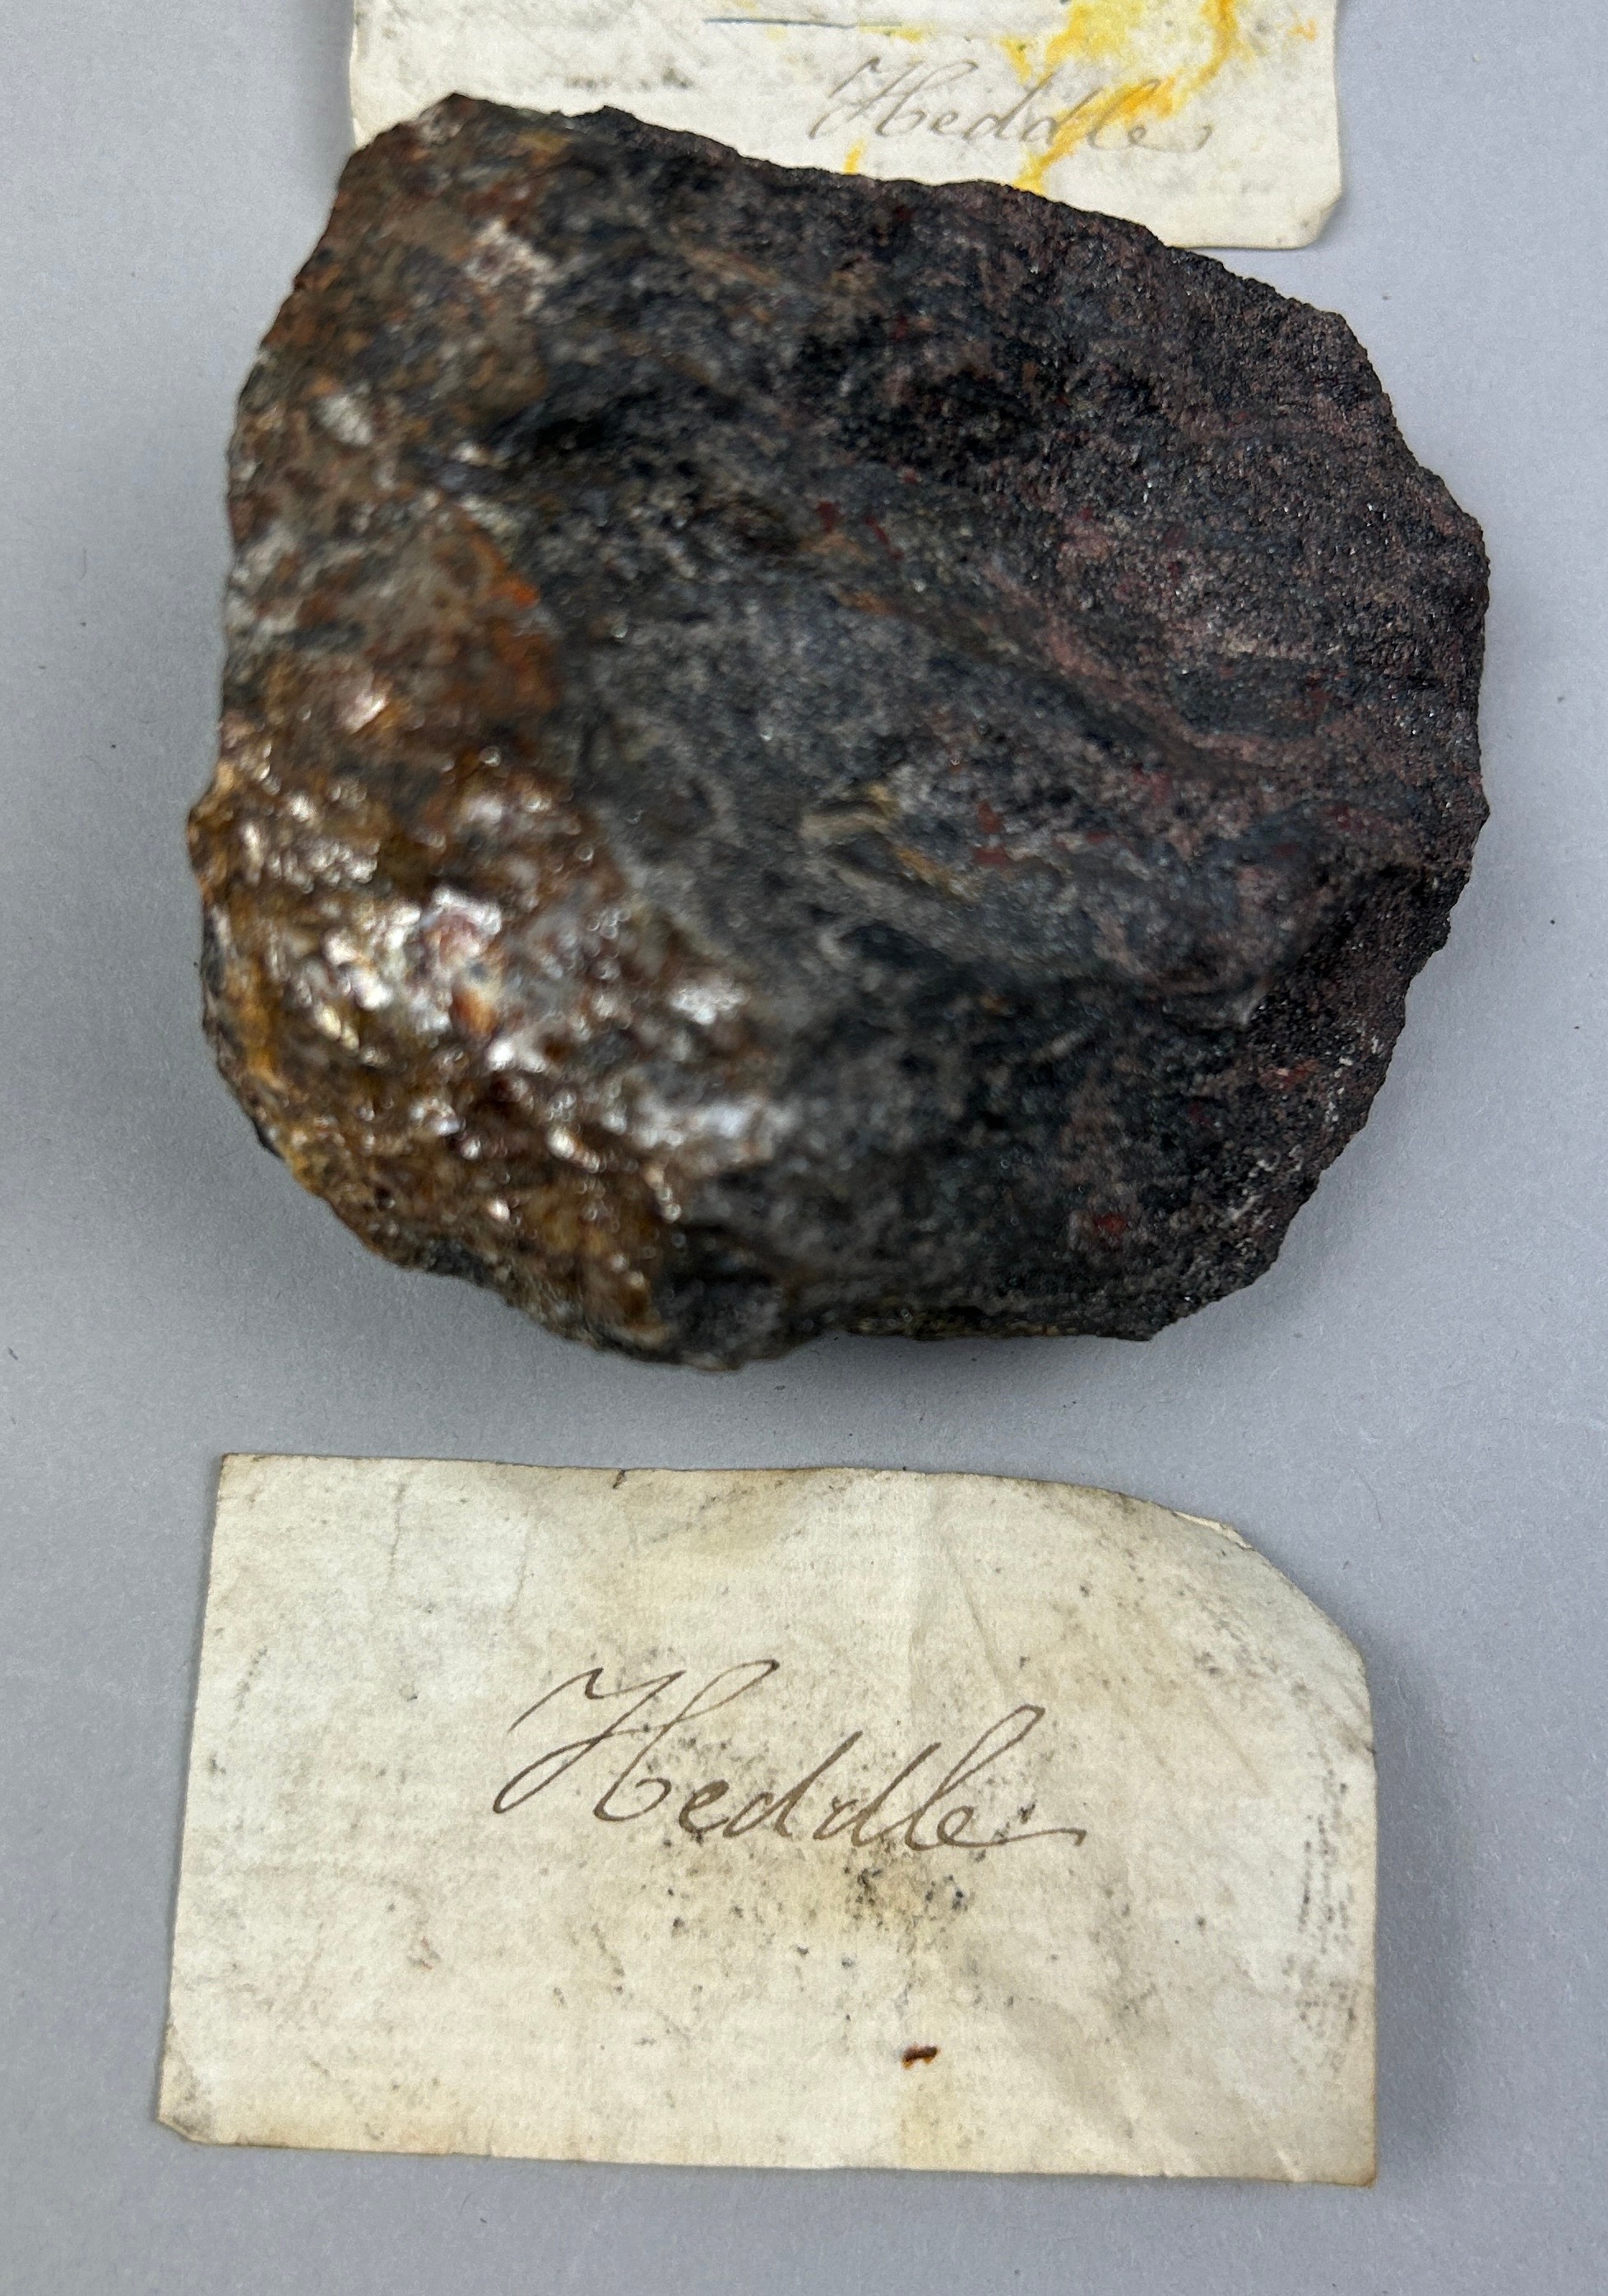 A RARE CABINET COLLECTION OF MINERALS CIRCA 1810-1860, including labels for some very important - Image 11 of 30